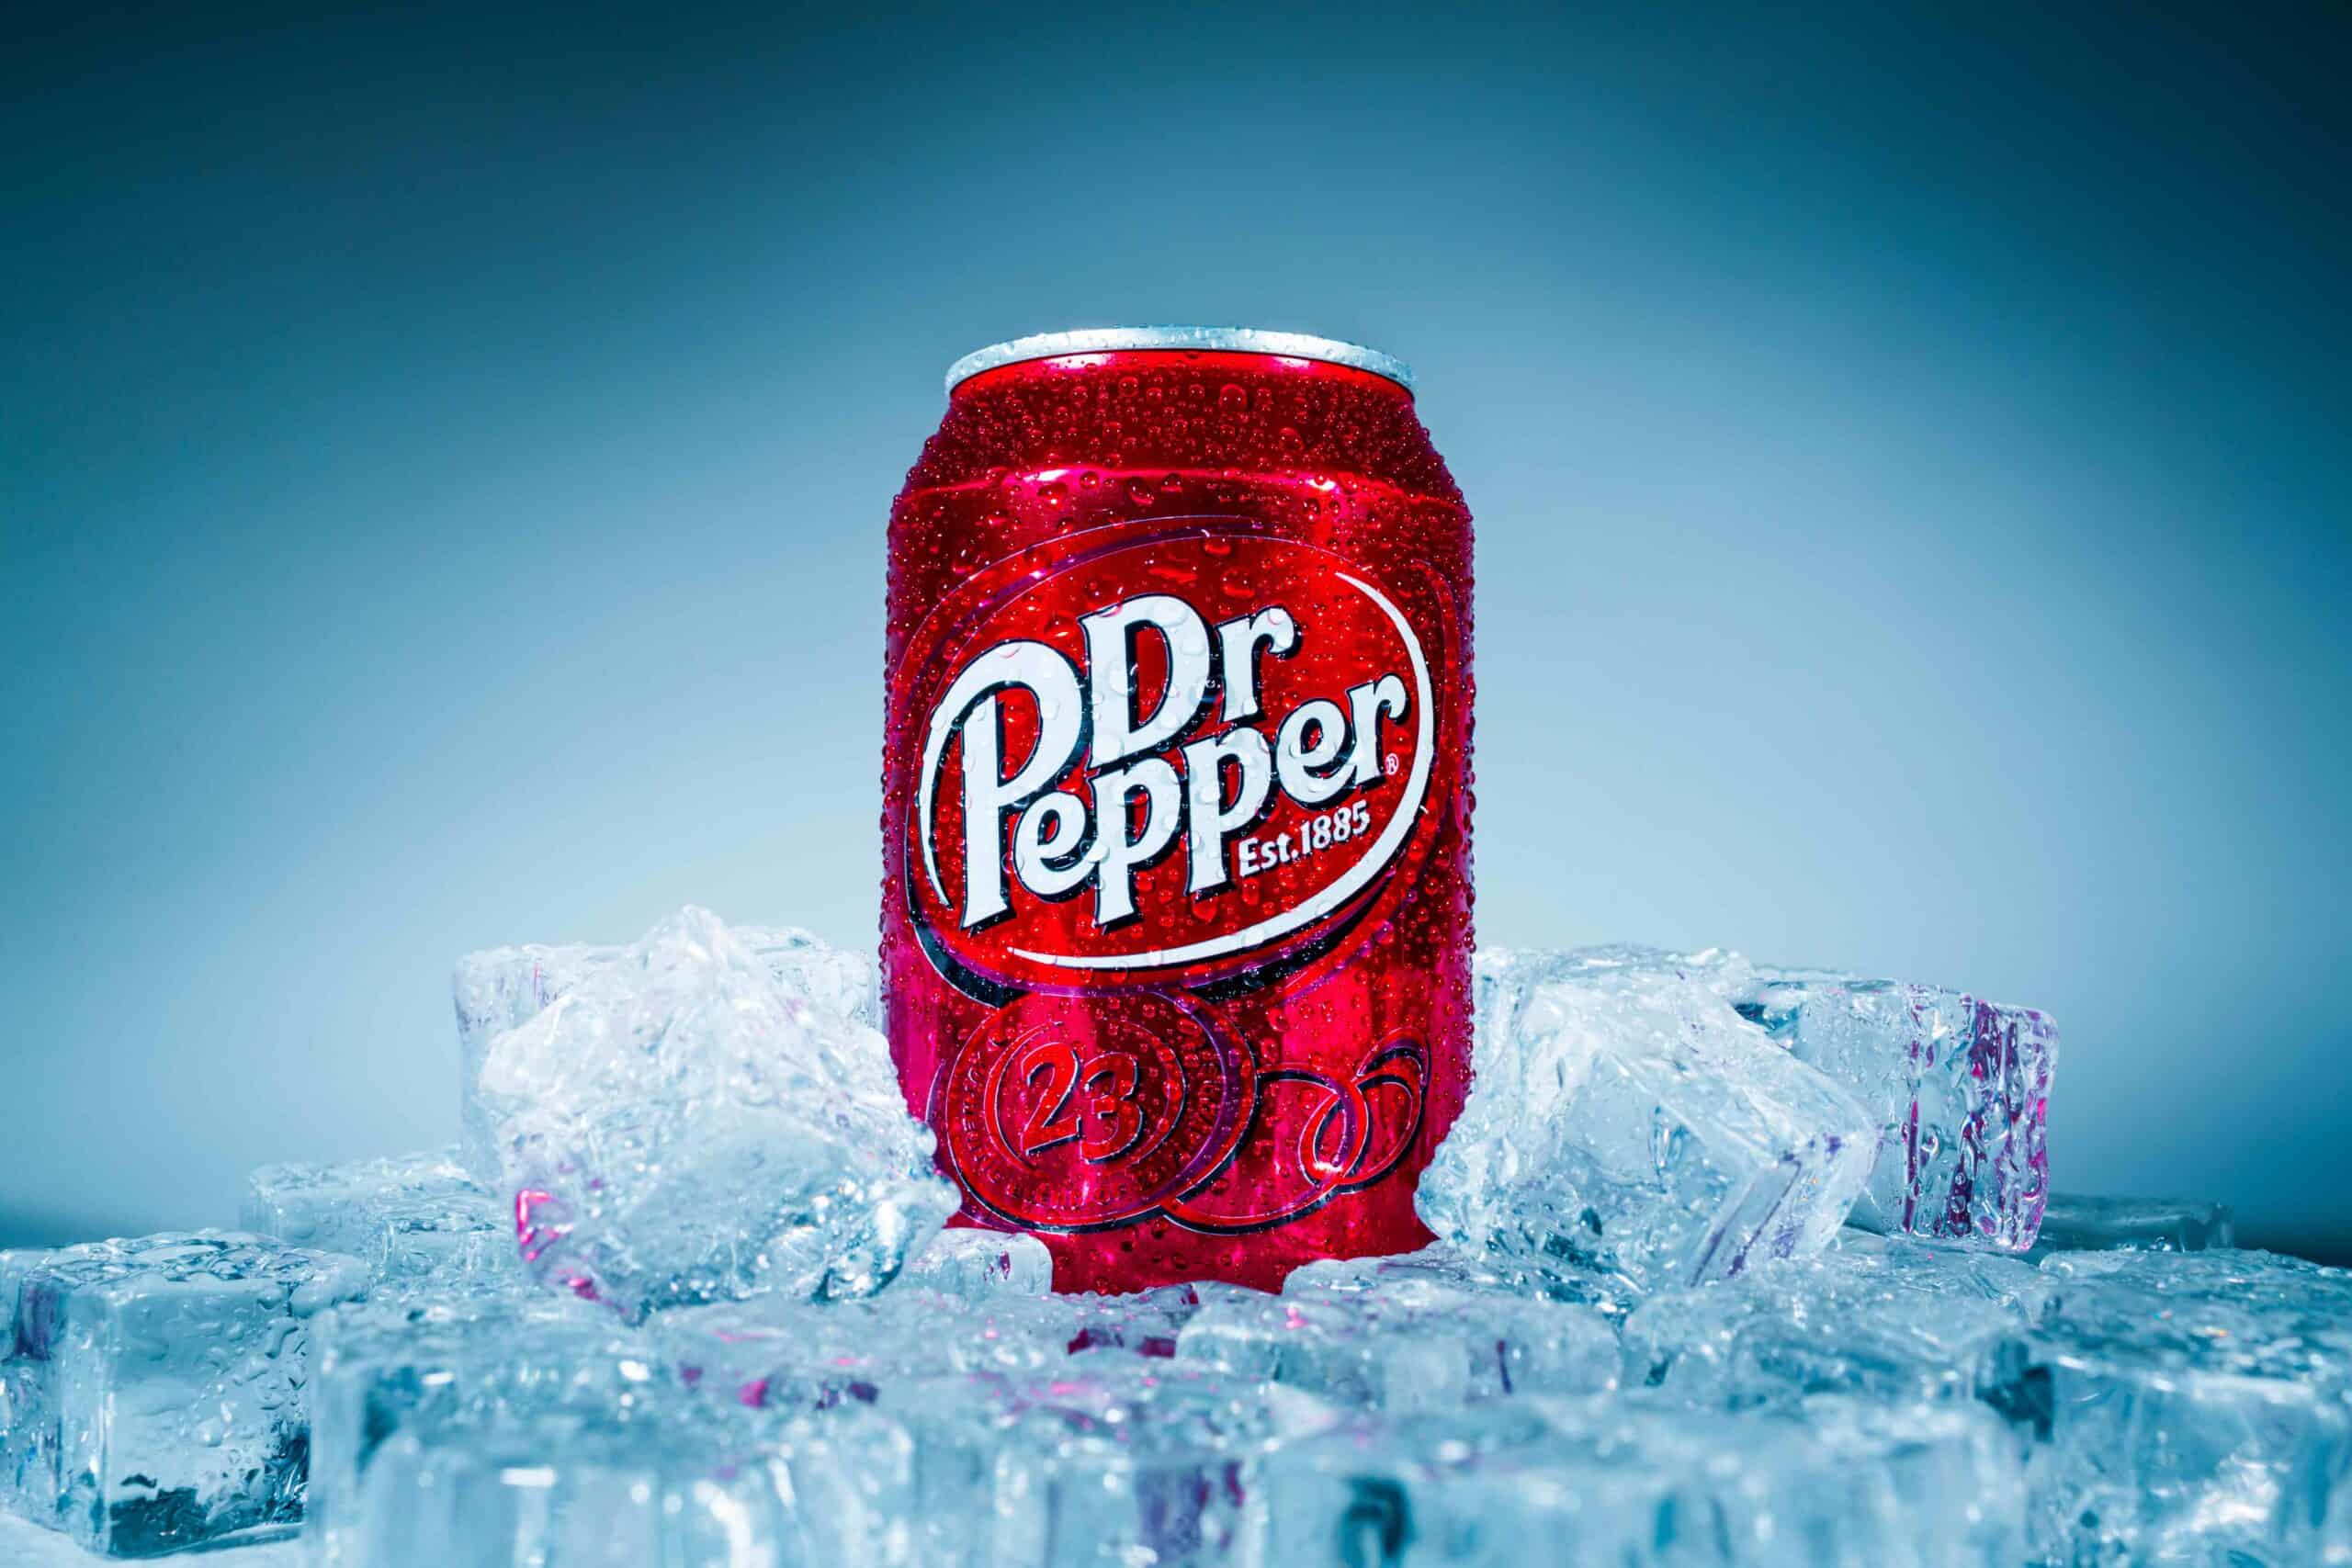  Can of Dr Pepper soft drink on ice. Dr Pepper is a soft drink marketed as having a unique flavor. The drink was created in the 1880s.